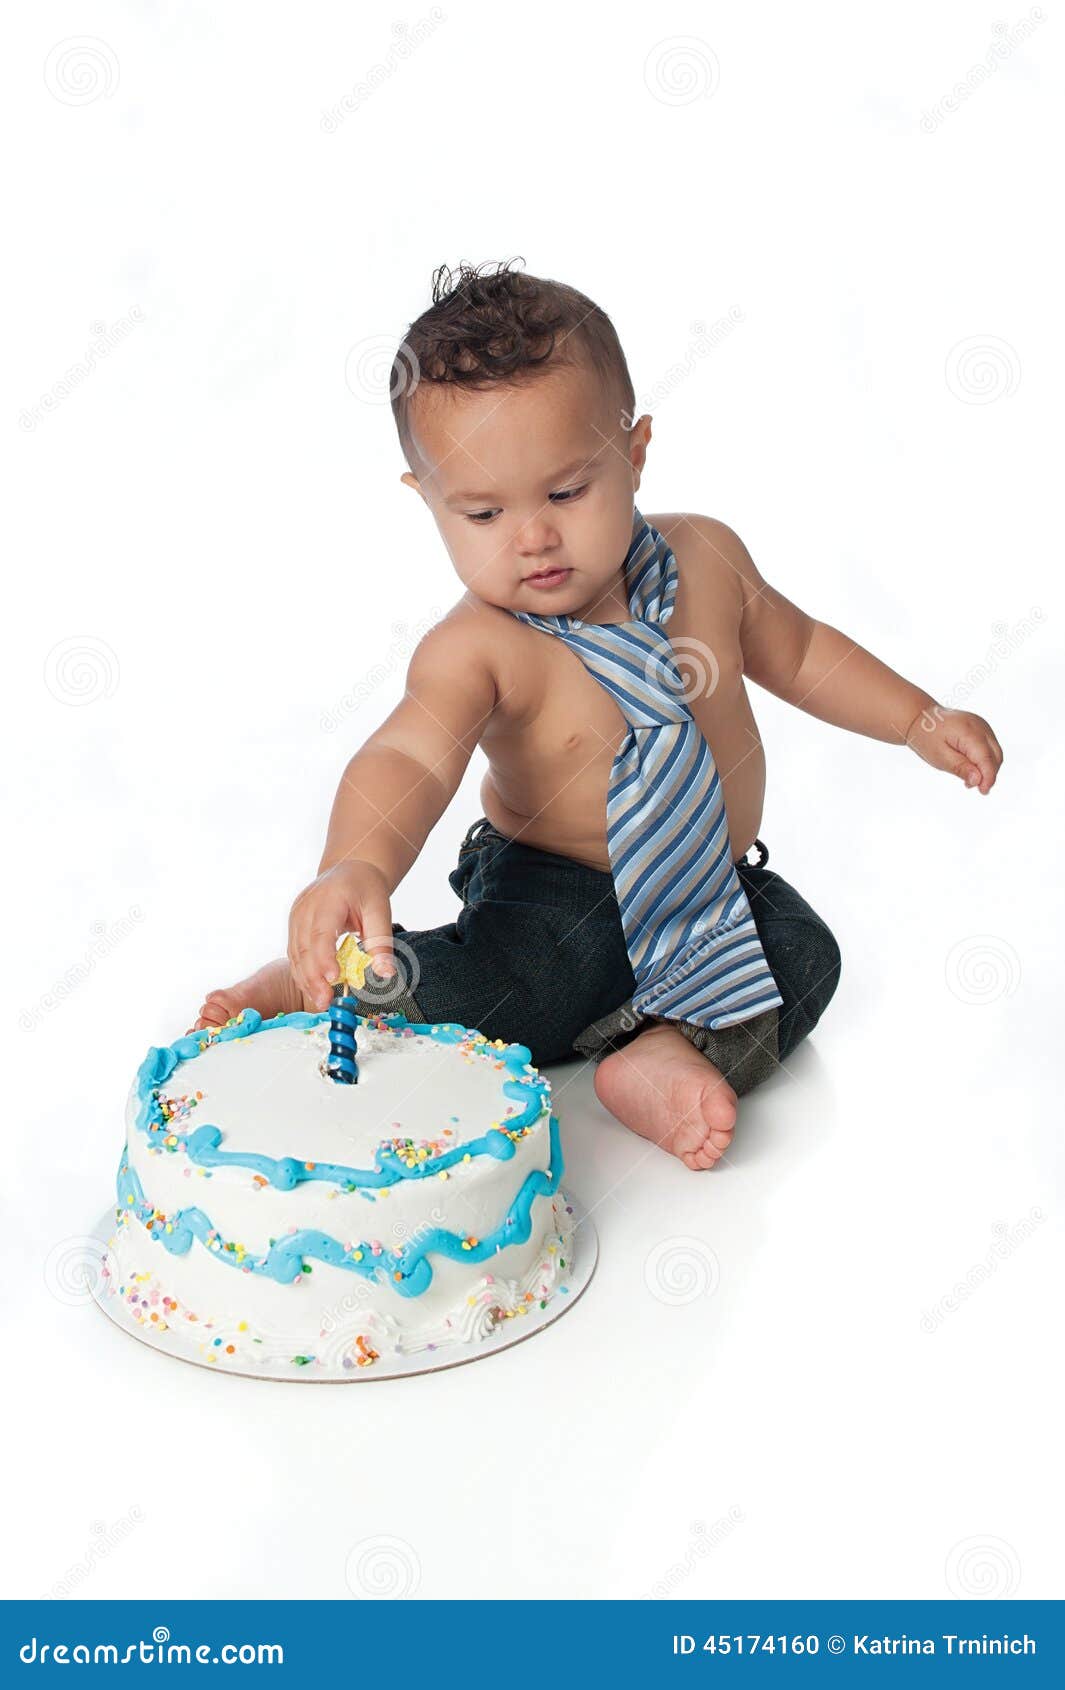 One Year Old Boy with Birthday Cake. A one year old boy grasping the candle on his birthday cake. Shot in the studio on a white background.